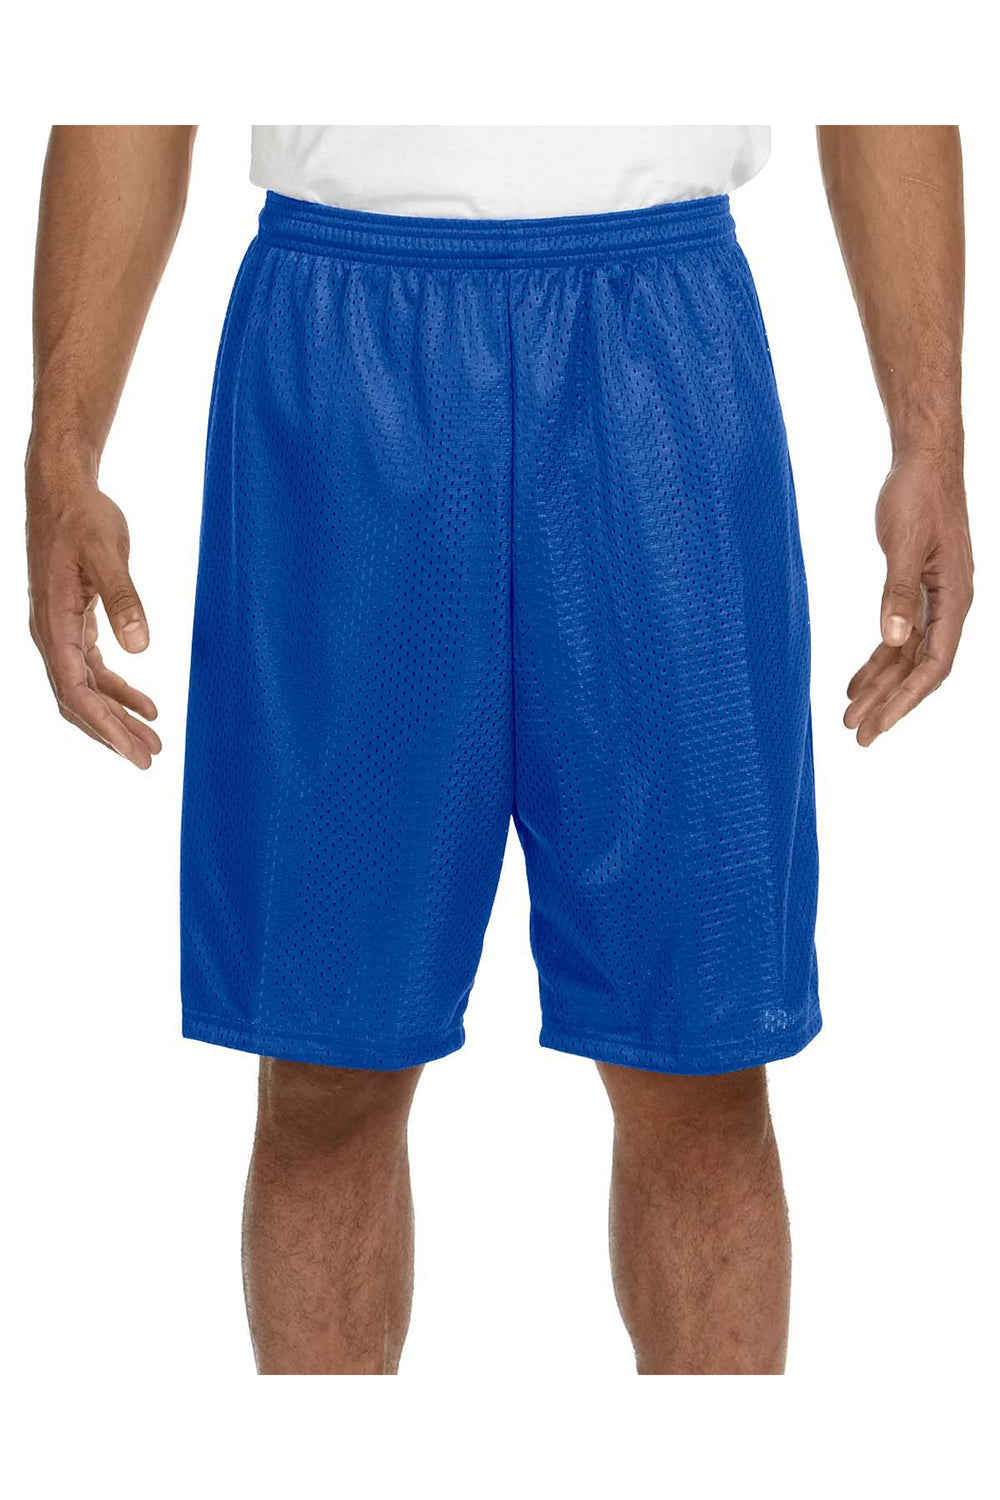 A4 N5296 Mens Moisture Wicking Tricot Mesh Shorts Royal Blue Model Front